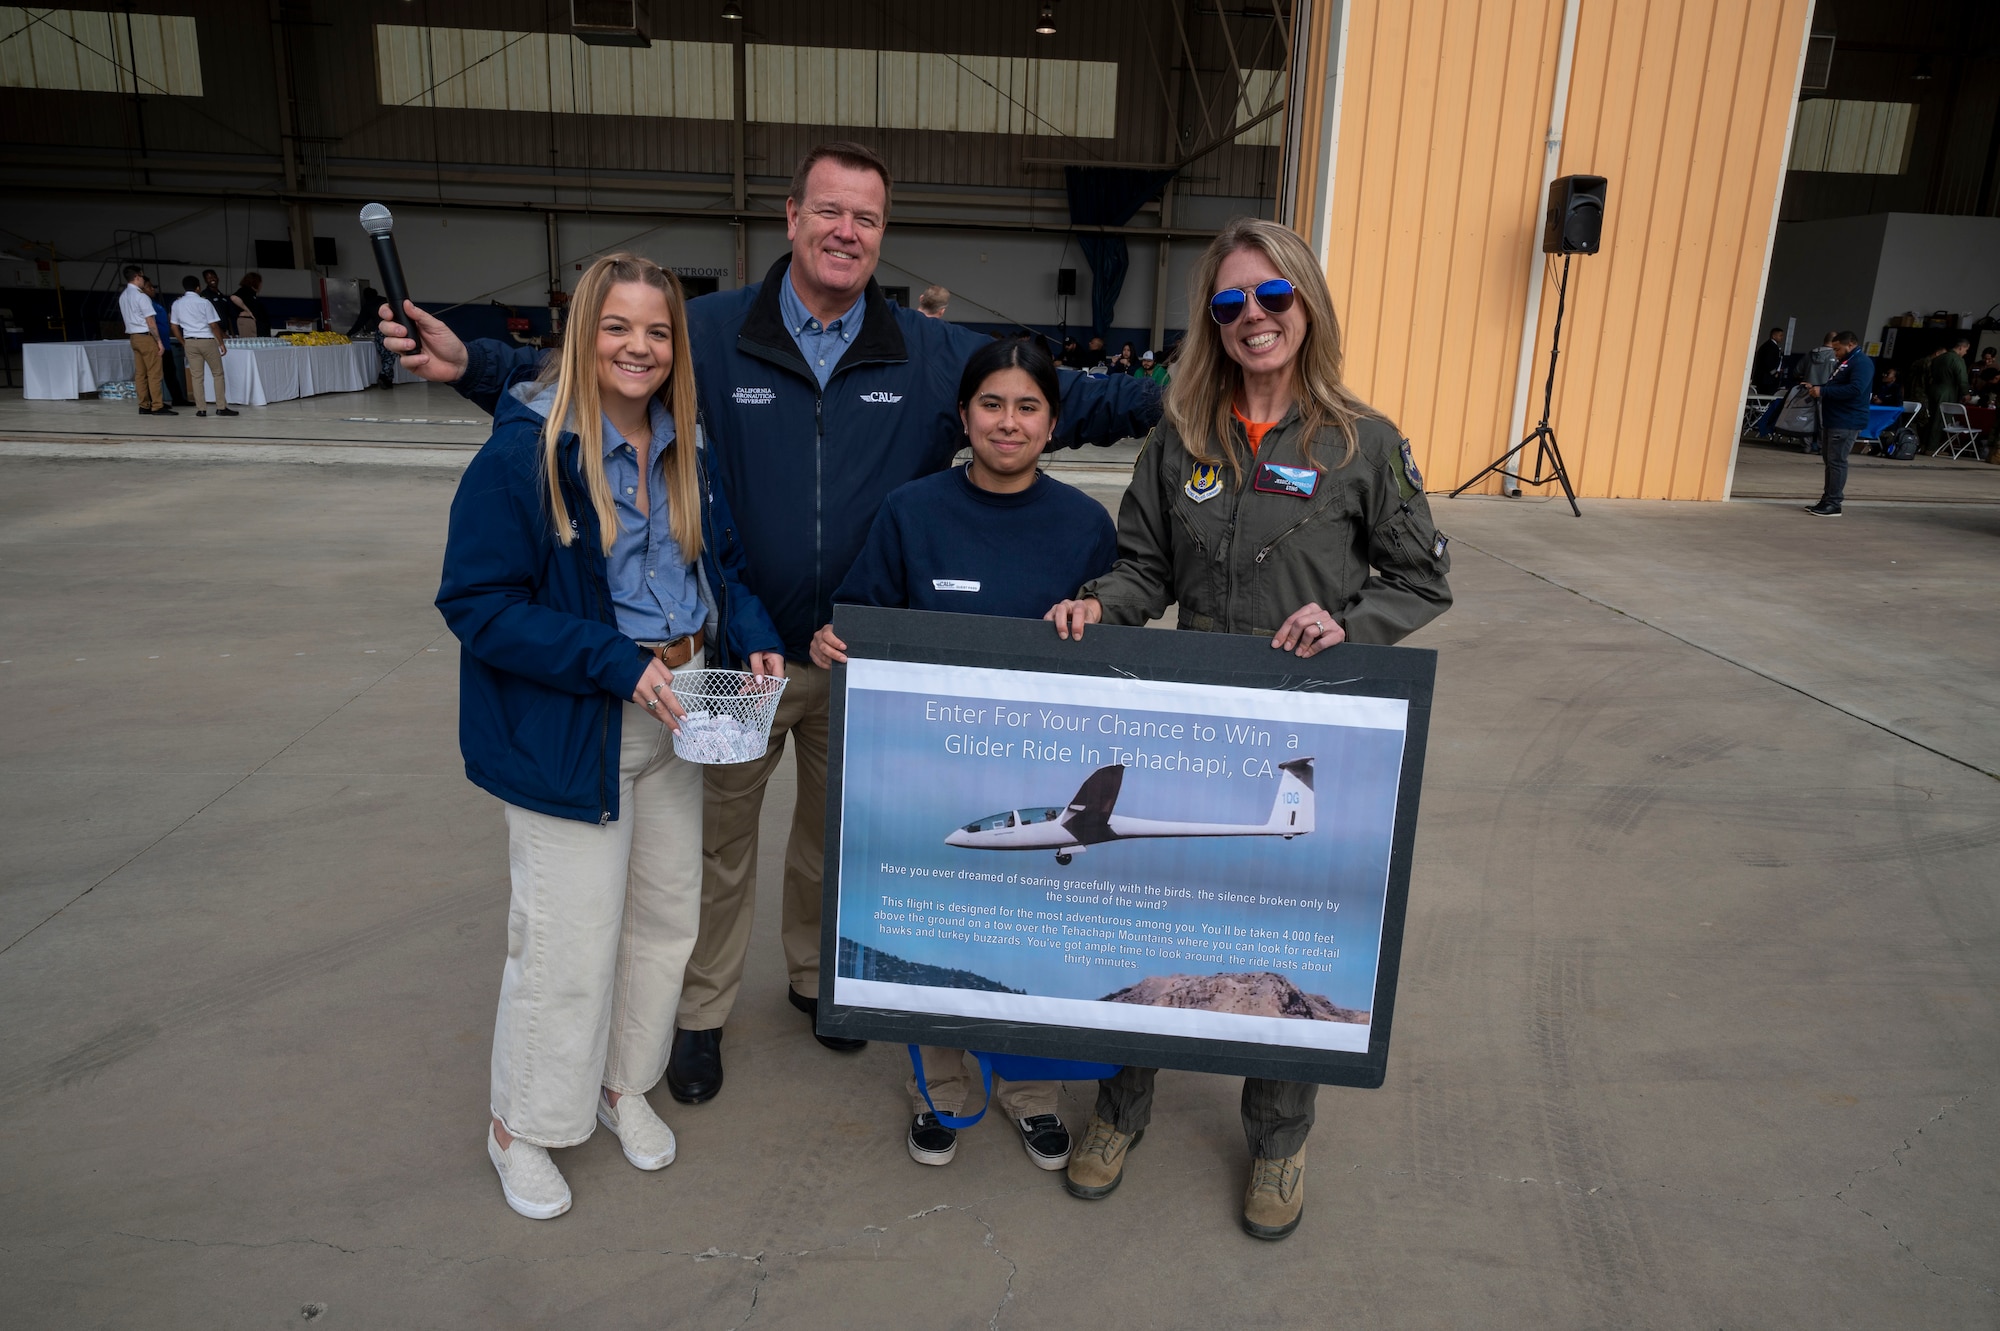 Jessica "Sting" Peterson, Technical Director, 412th Operations Group presents a Tehachapi glider trip prize to a winning student at California Aeronautical University Aviation Career Day in Bakersfield, California, Feb. 3.